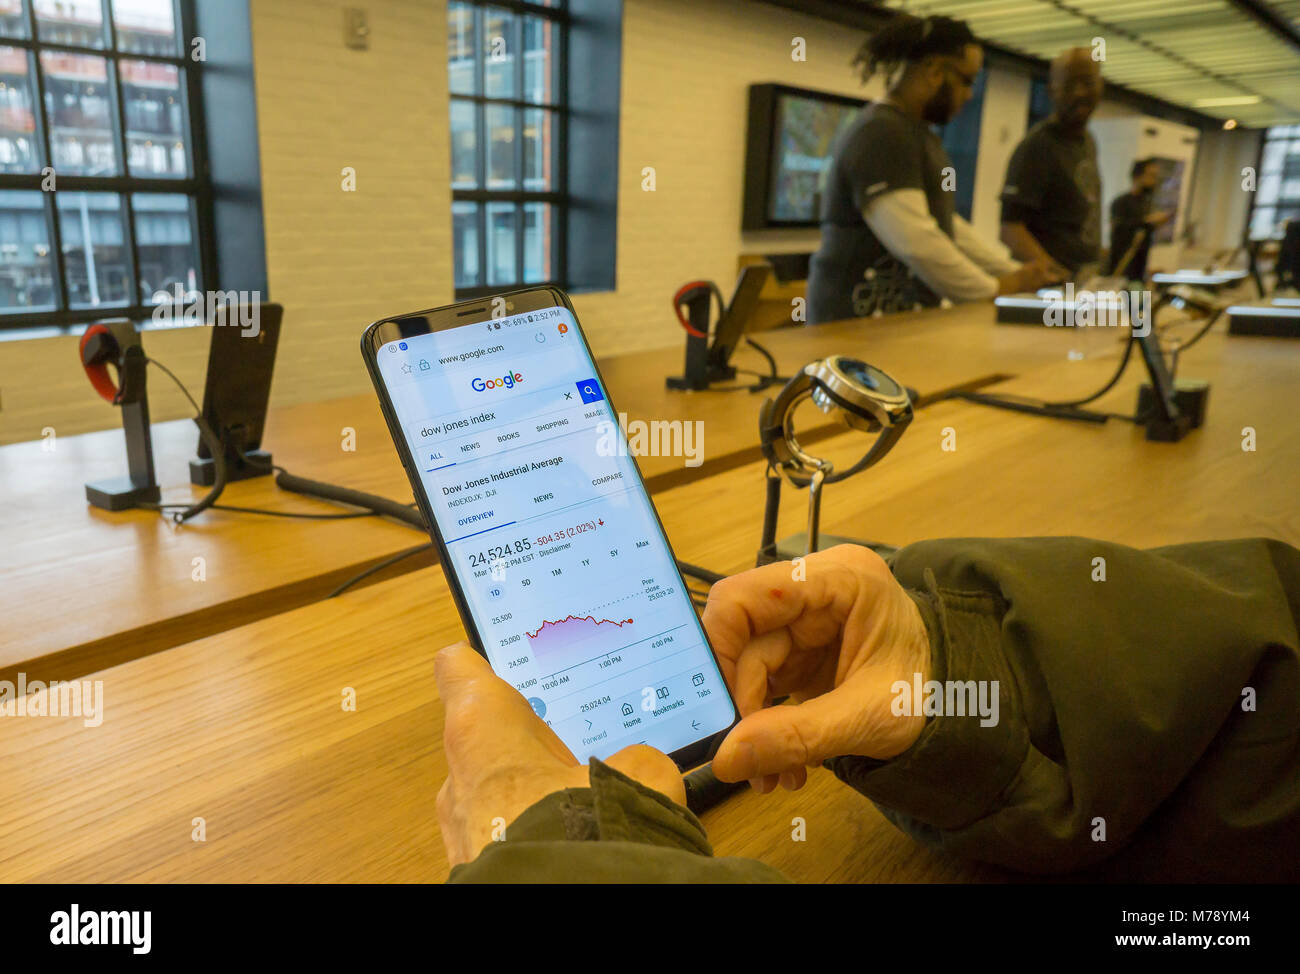 Visitors to the Samsung 837 showroom in the Meatpacking District in New York admire a Samsung Galaxy S9 Plus smartphone on Thursday, March 1, 2018. Samsung released their new Galaxy S9 and S9+ on February 25 with availability for purchase on March 16.  (© Richard B. Levine) Stock Photo